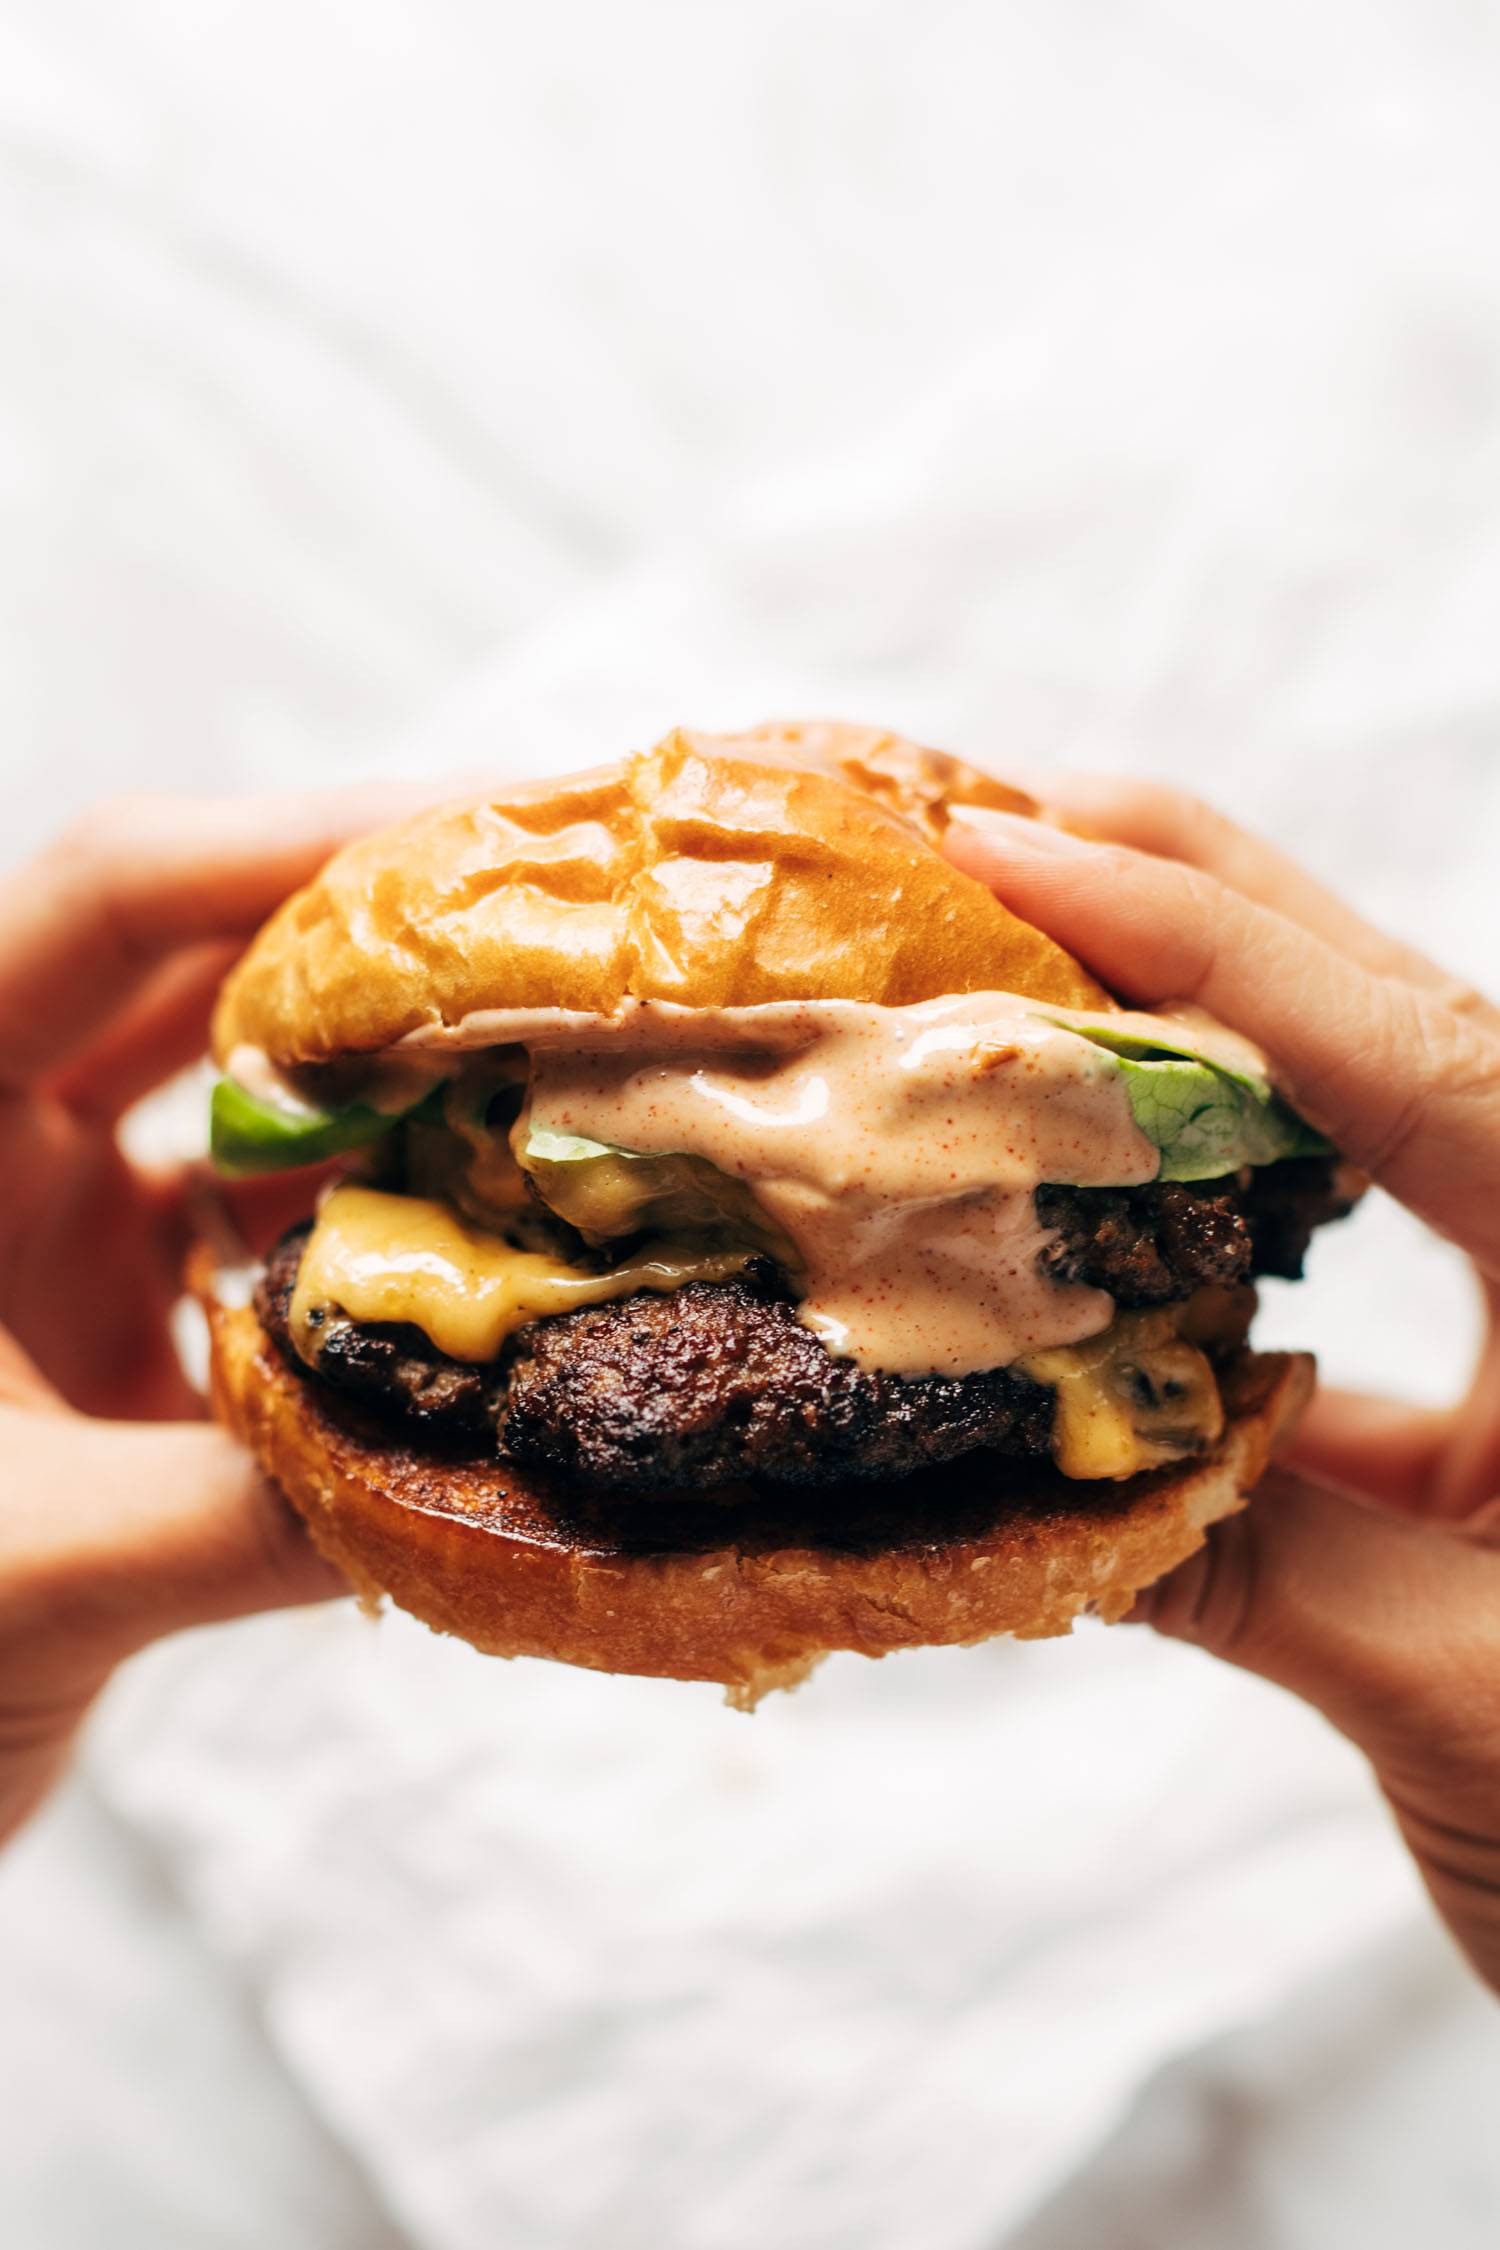 Hands holding a juicy smash burger with sauce.